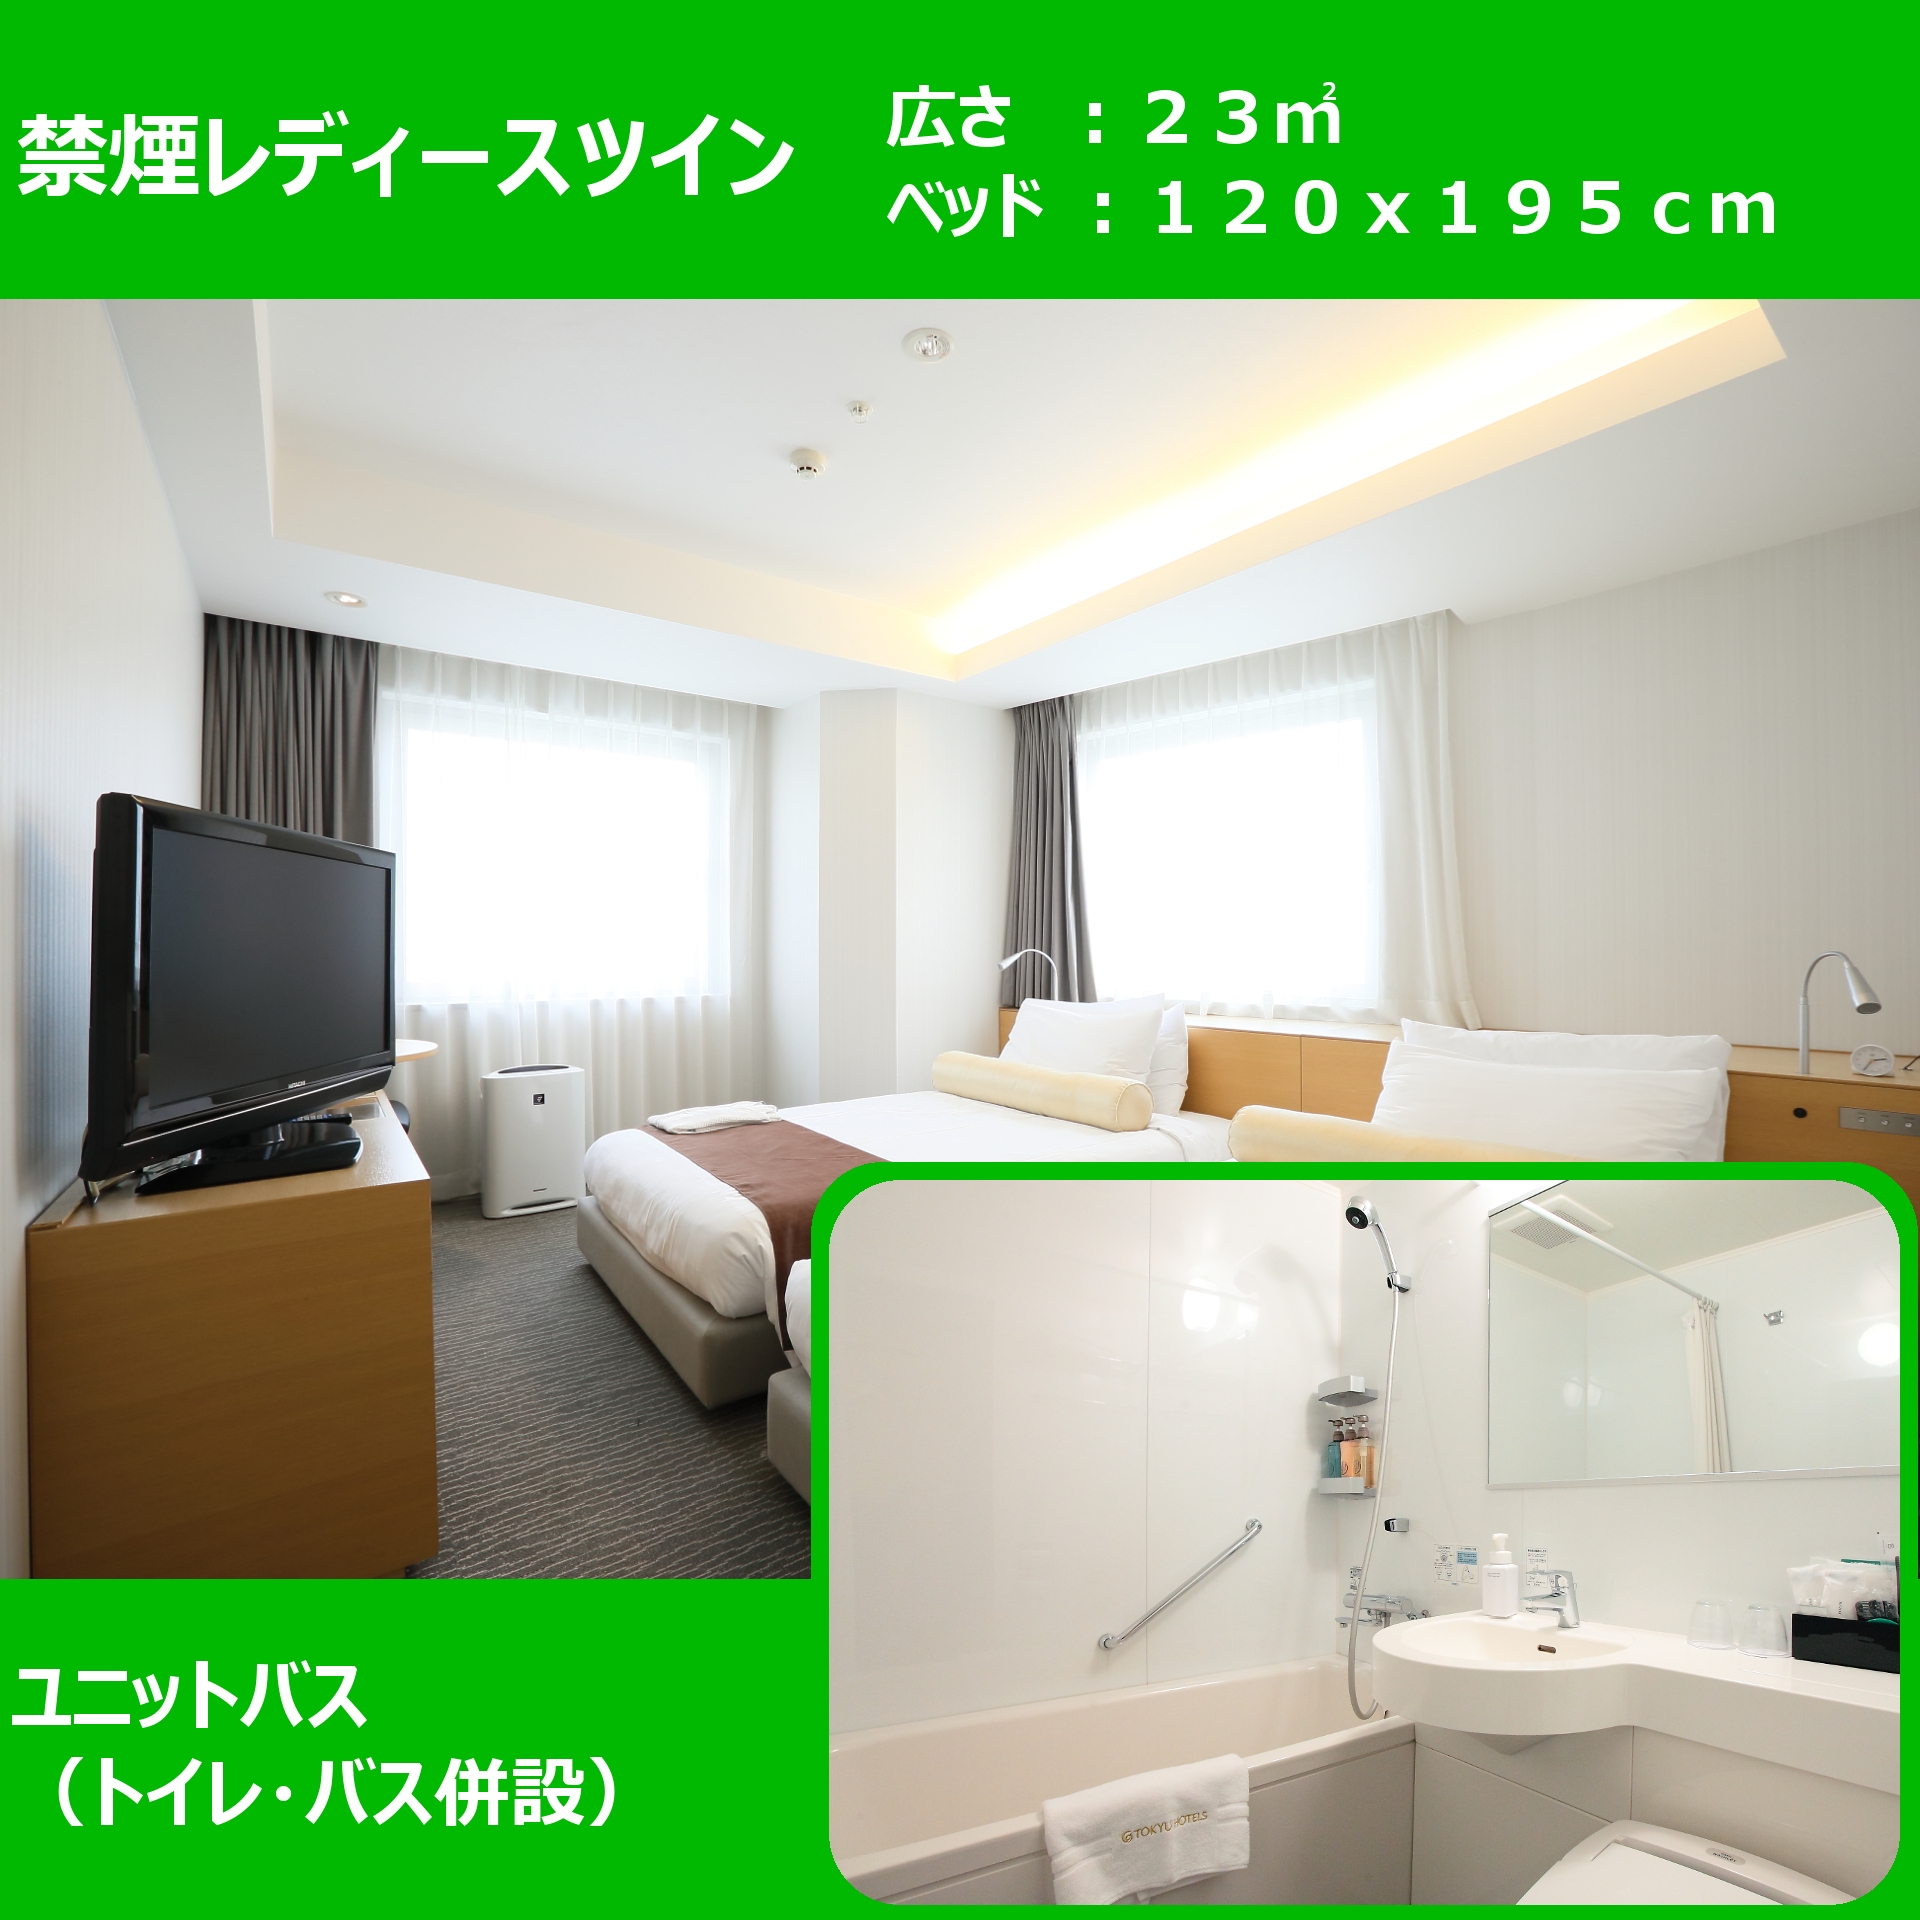 Non-smoking ladies twin ■ High-rise floor, women-only floor ■ 22.6 square meters, bed width 120 cm ■ Unit bath